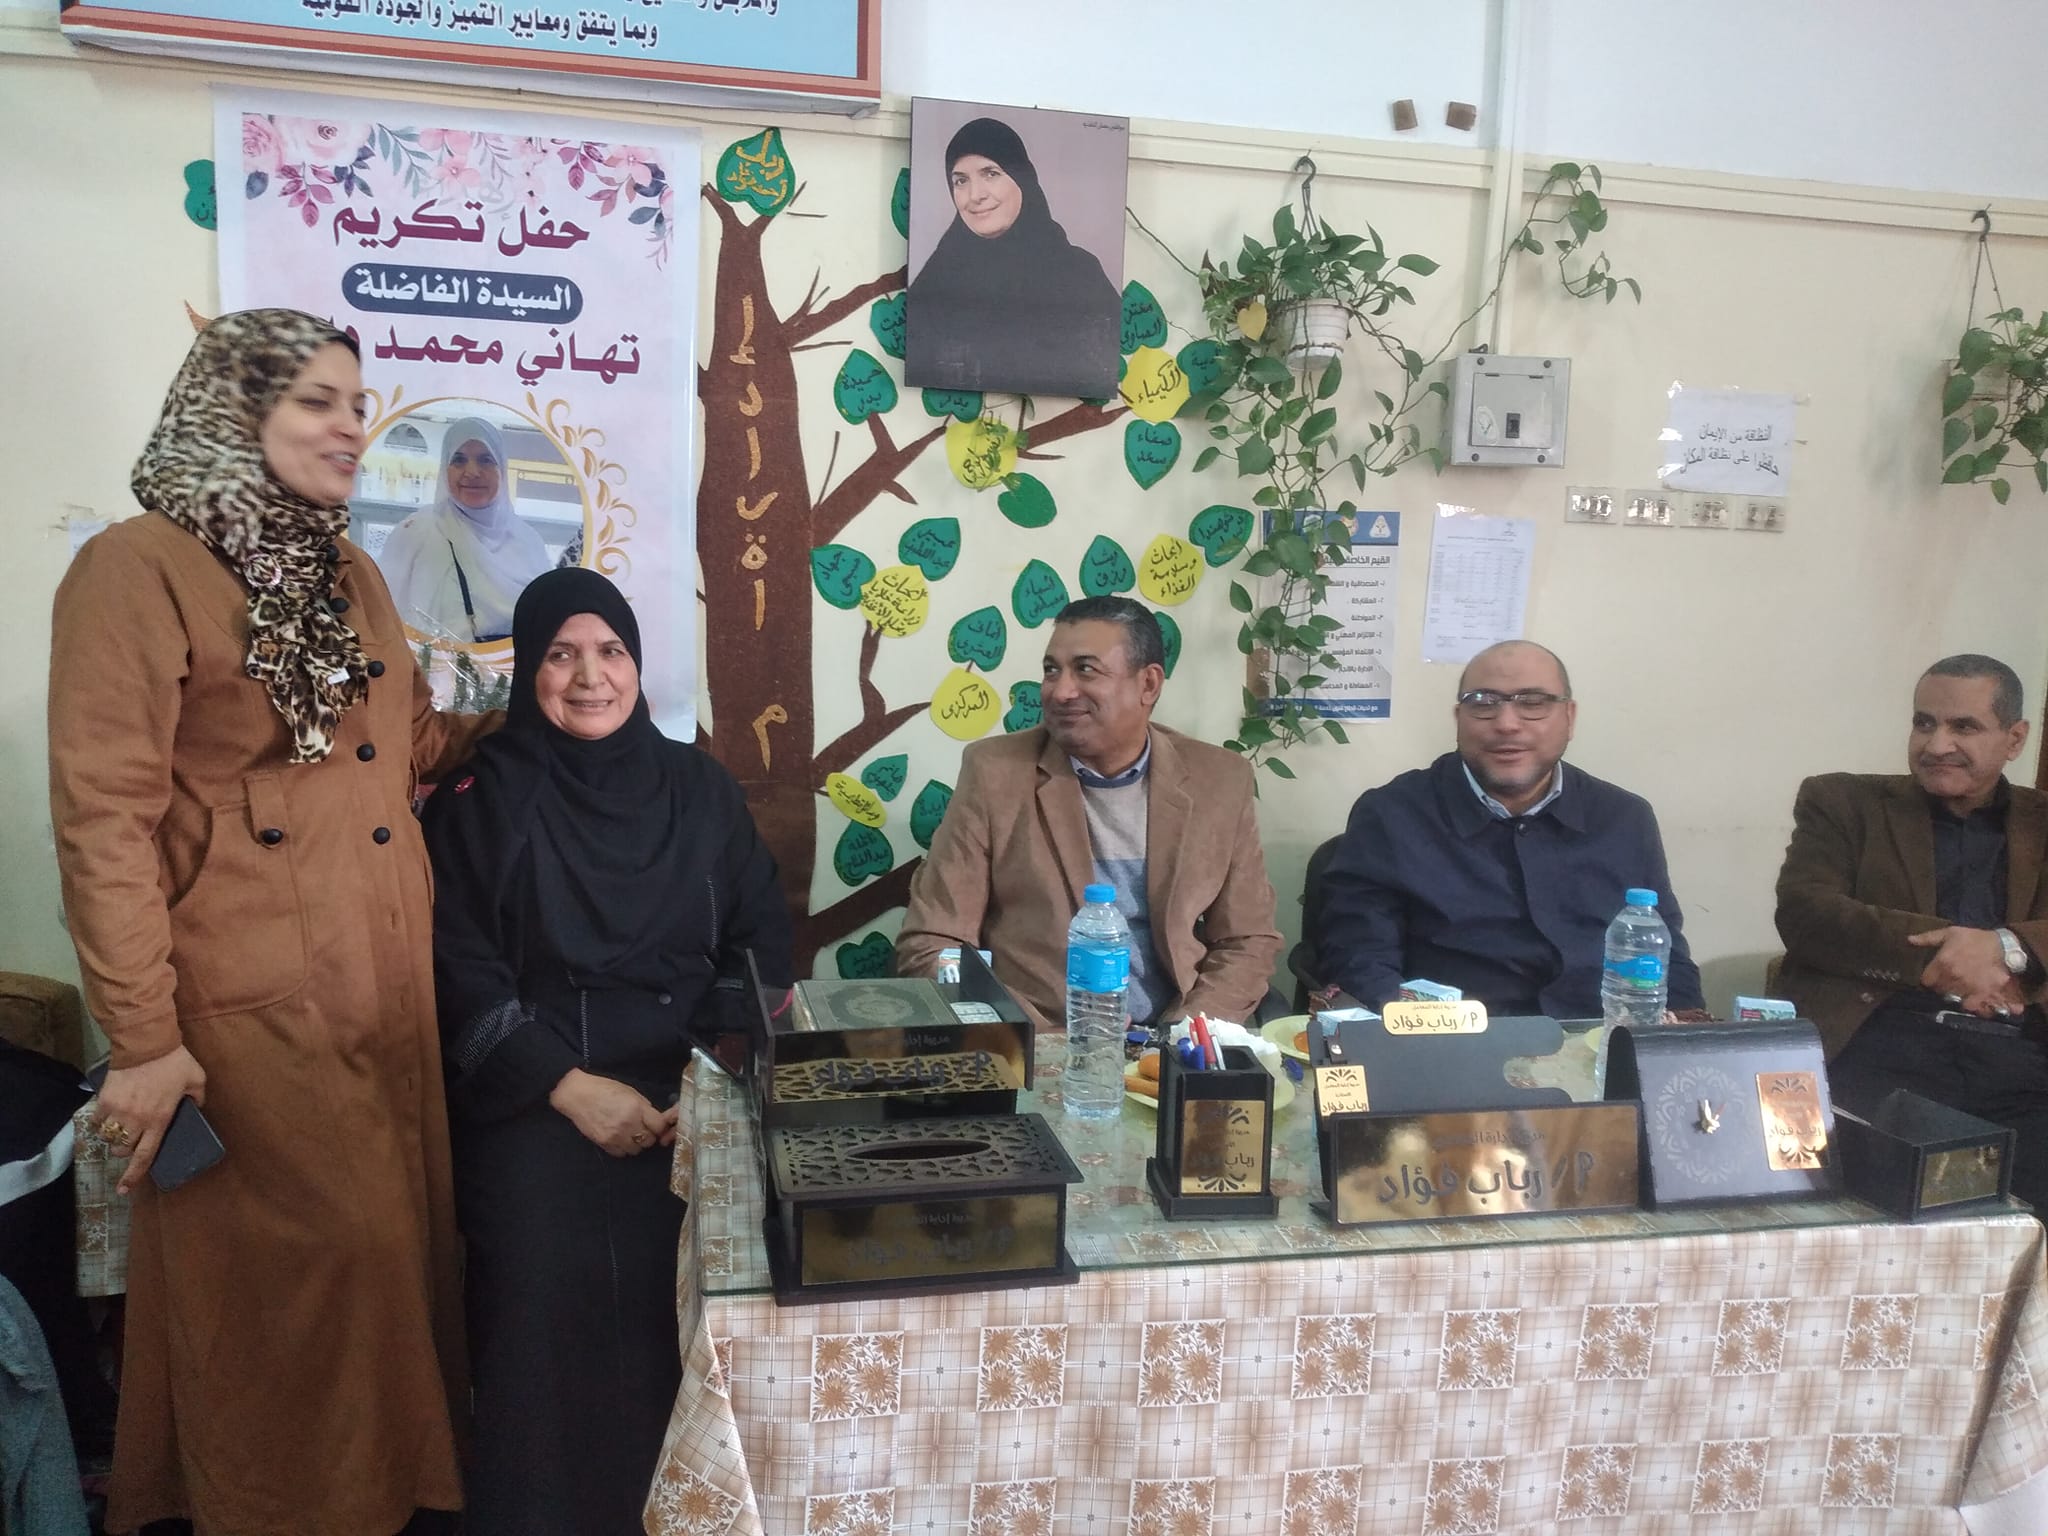 Honoring Madam Tahani Mohamed Daoud, employee of the Laboratories Department - Nutrition Department Laboratories, and honoring Hajj Mohamed Abdel Salam for reaching retirement age.